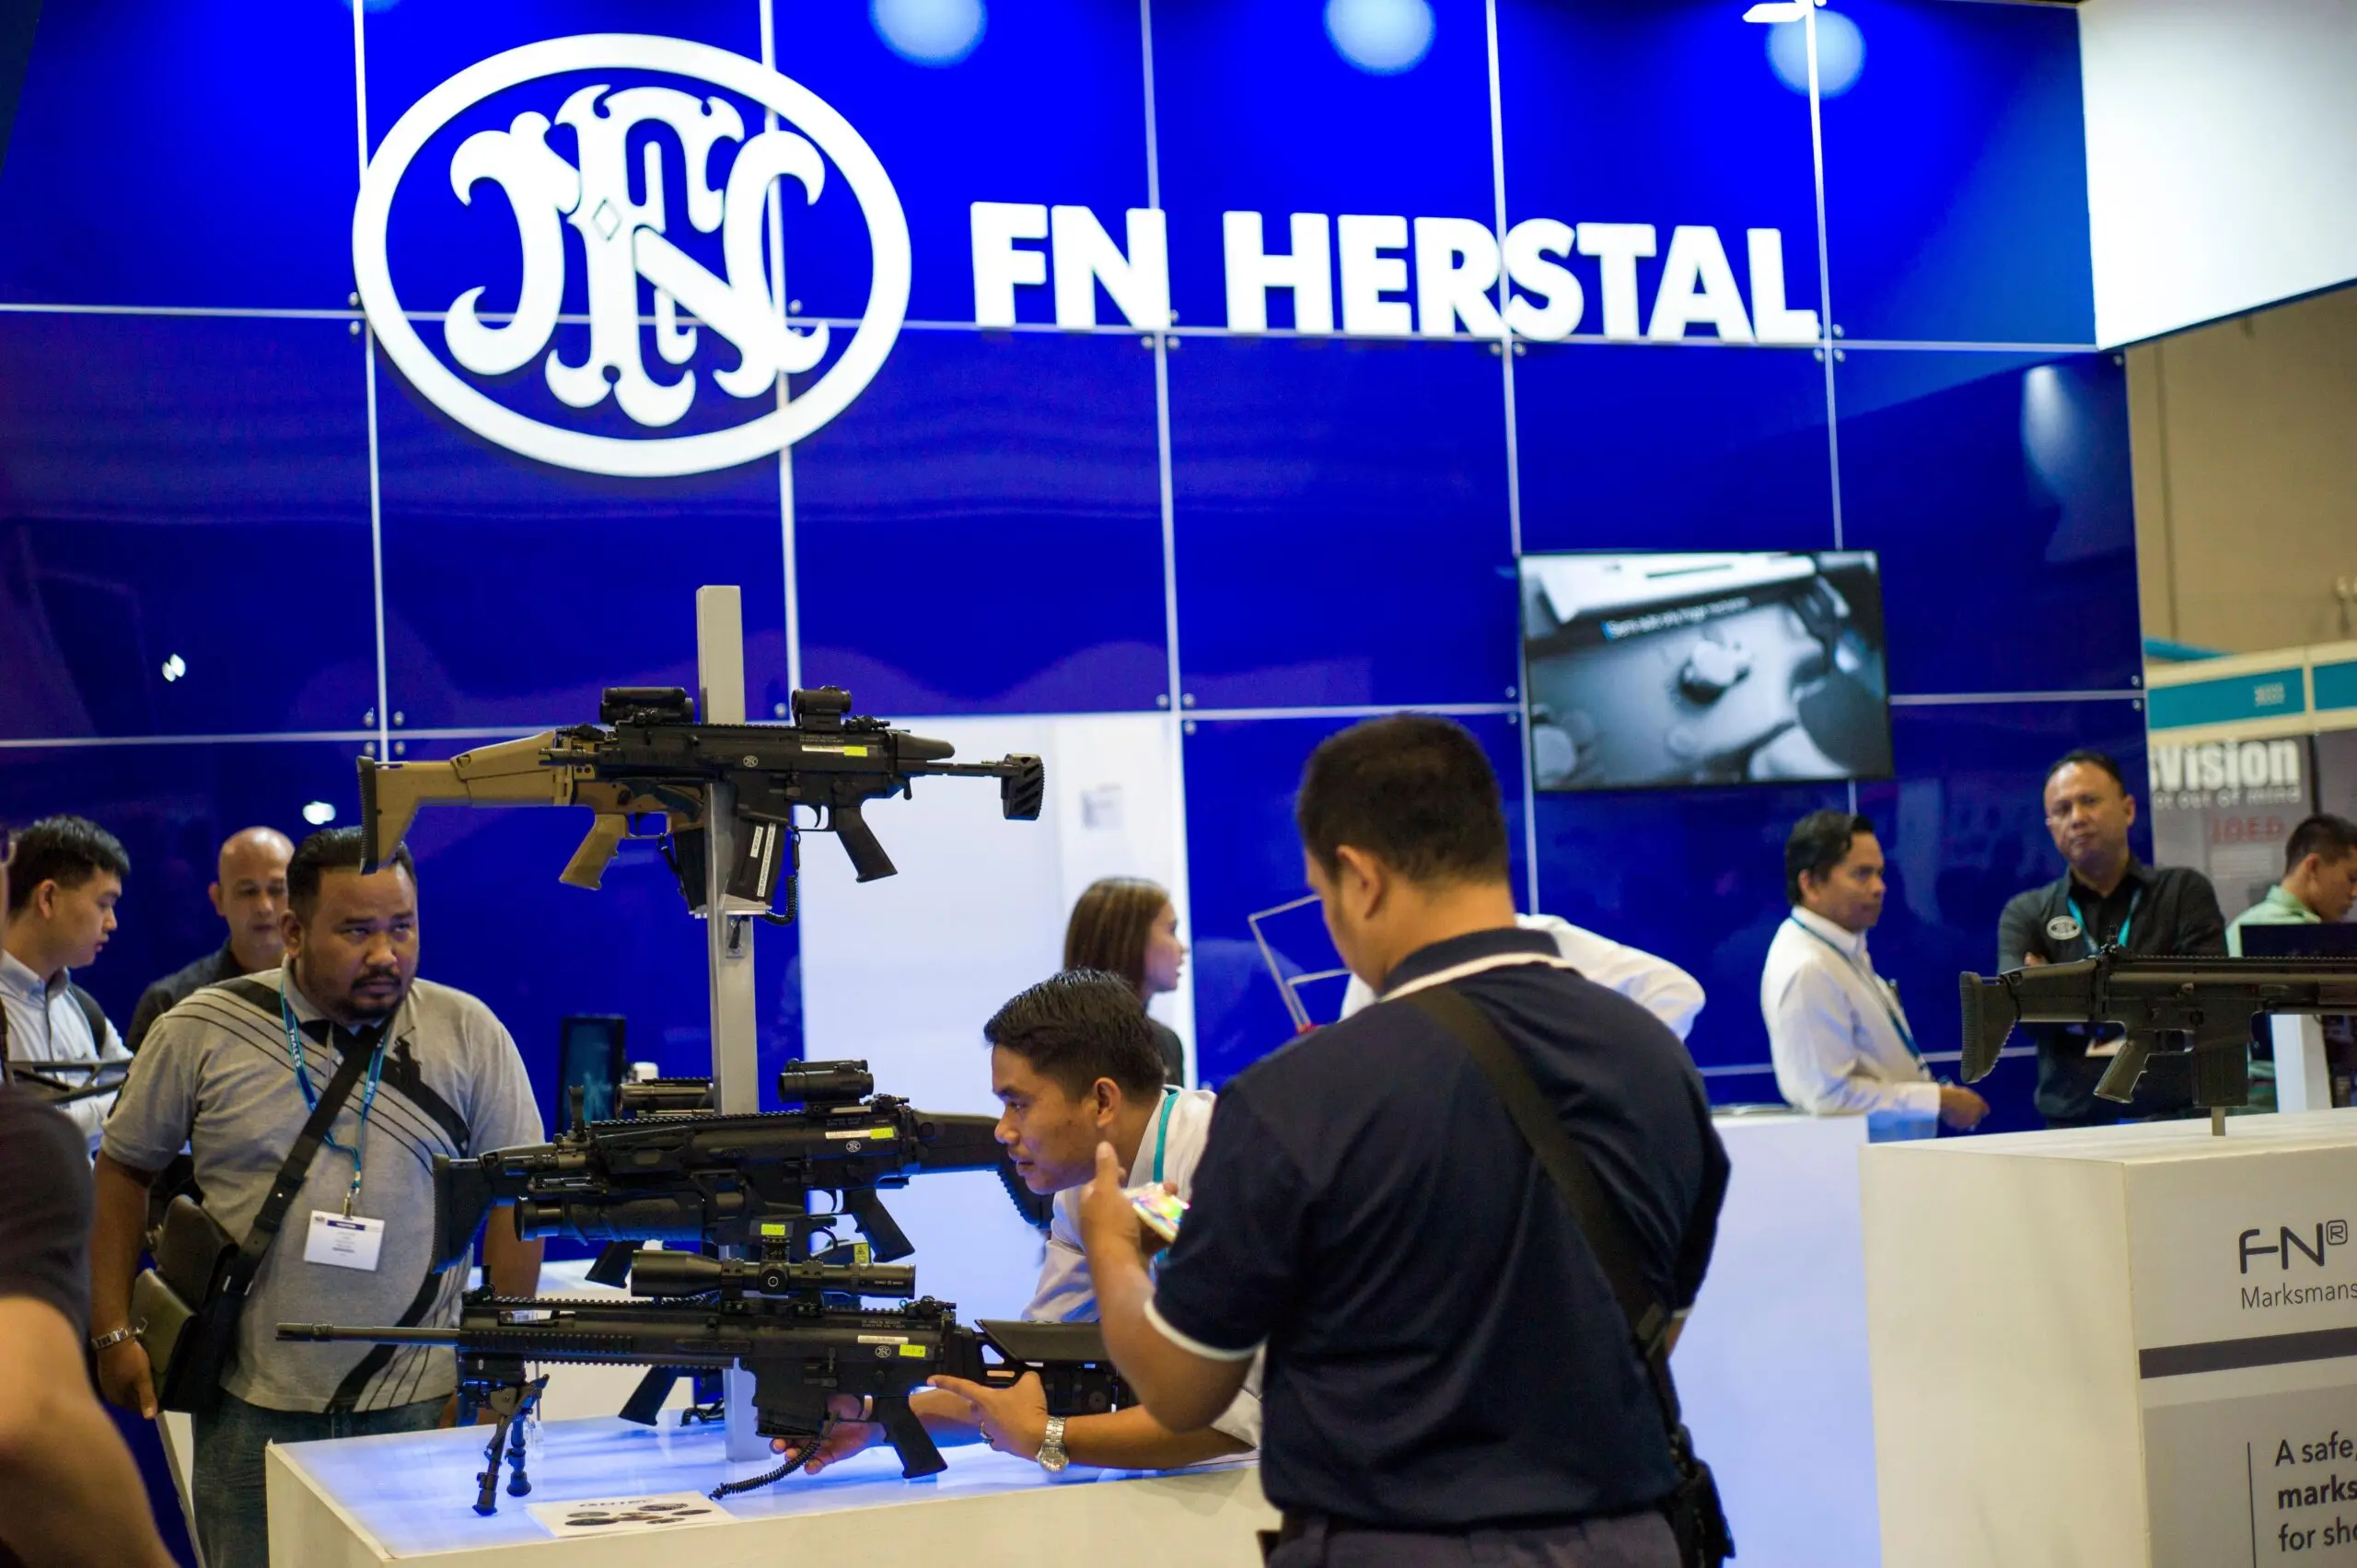 An FN Herstal exhibition booth at the Defence Services Asia 2018 international exhibition in Kuala Lumpur, Malaysia.